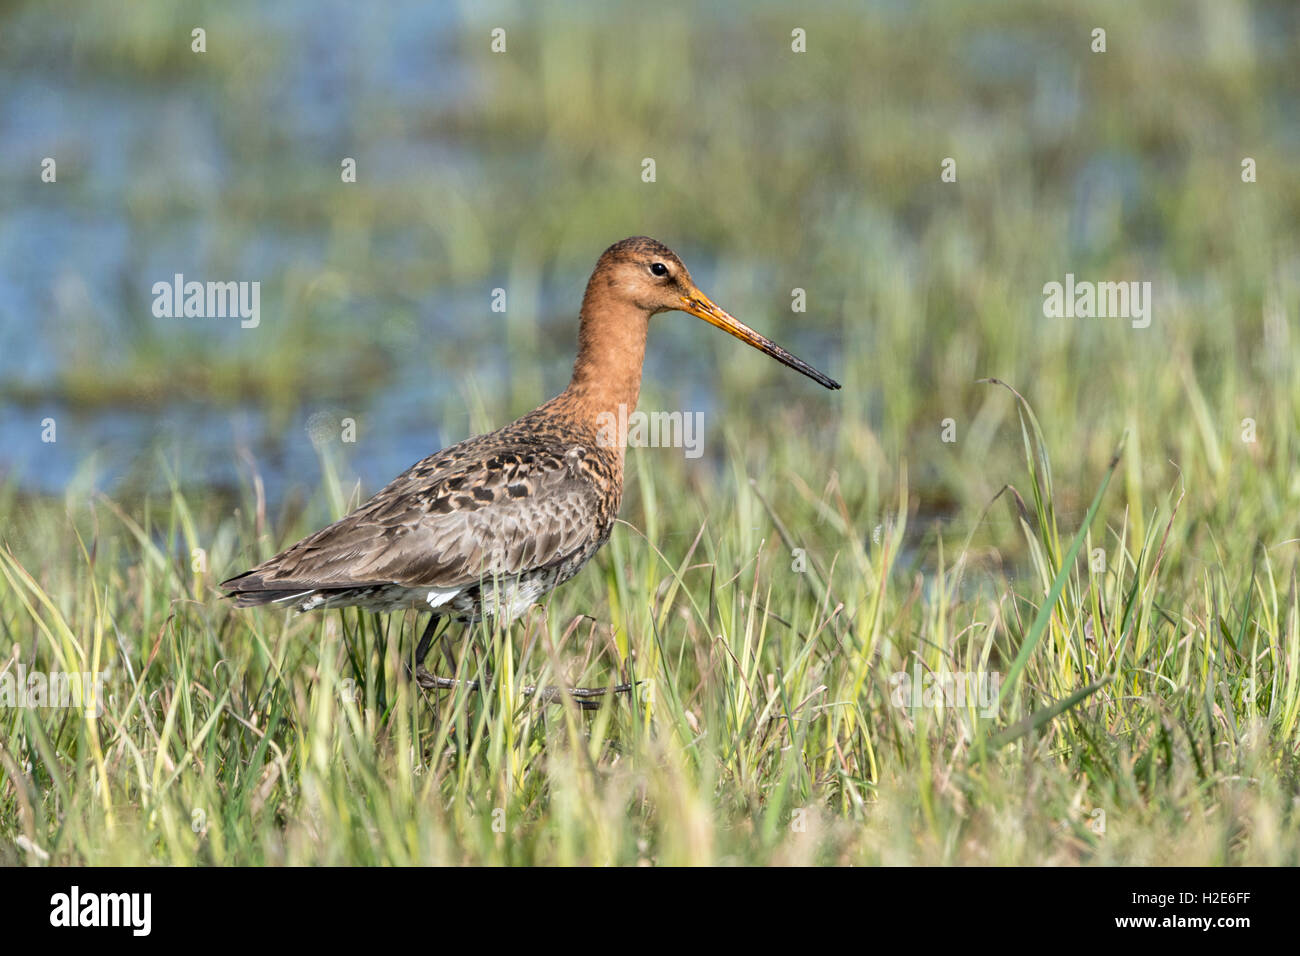 Black-tailed godwit (Limosa limosa) in wetland, Dümmer Lake, Diepholz district, Lower Saxony, Germany Stock Photo